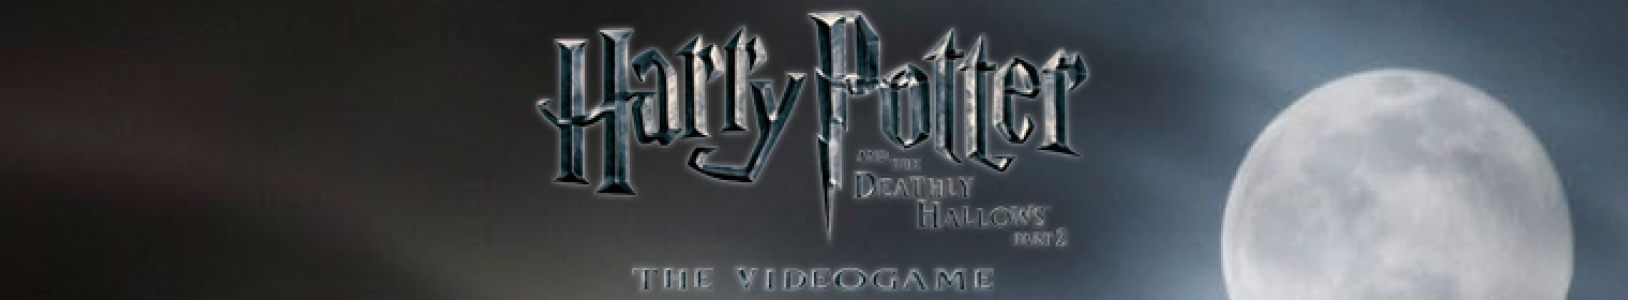 Harry Potter and the Deathly Hallows, Part 2 banner